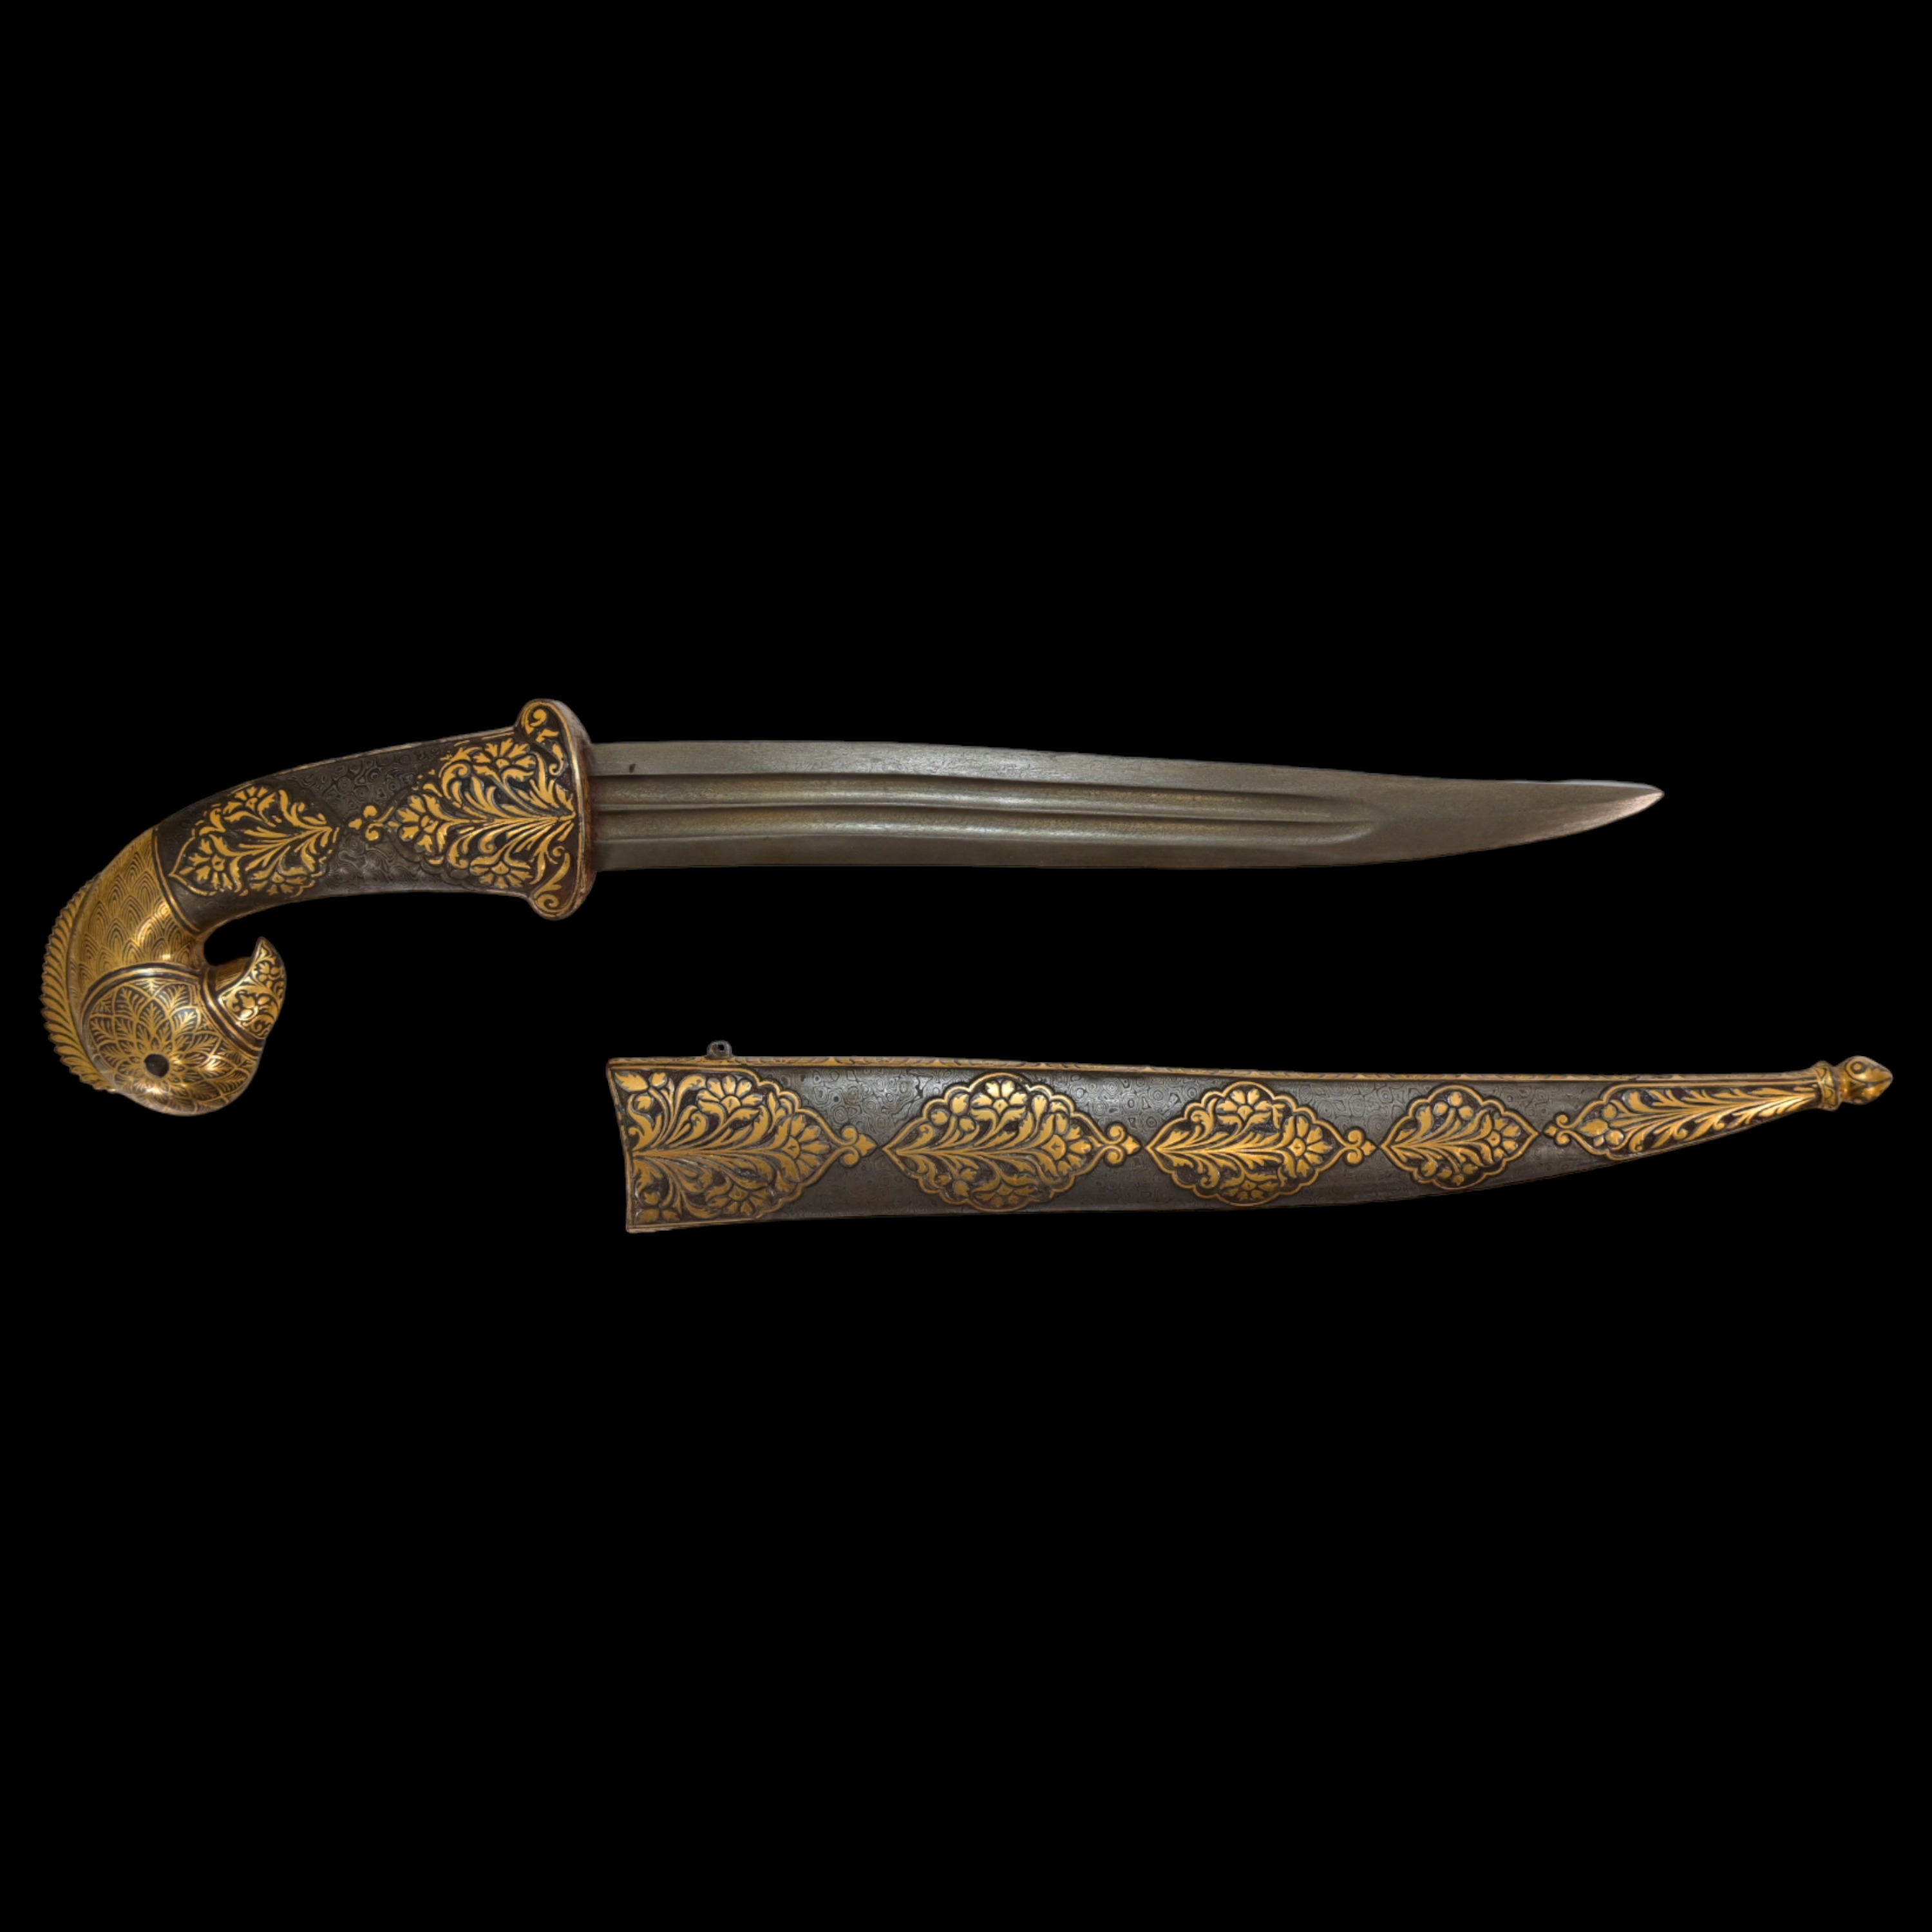 Richly decorated gold kofgari Indian dagger with wootz blade, 19th century. - Image 10 of 12